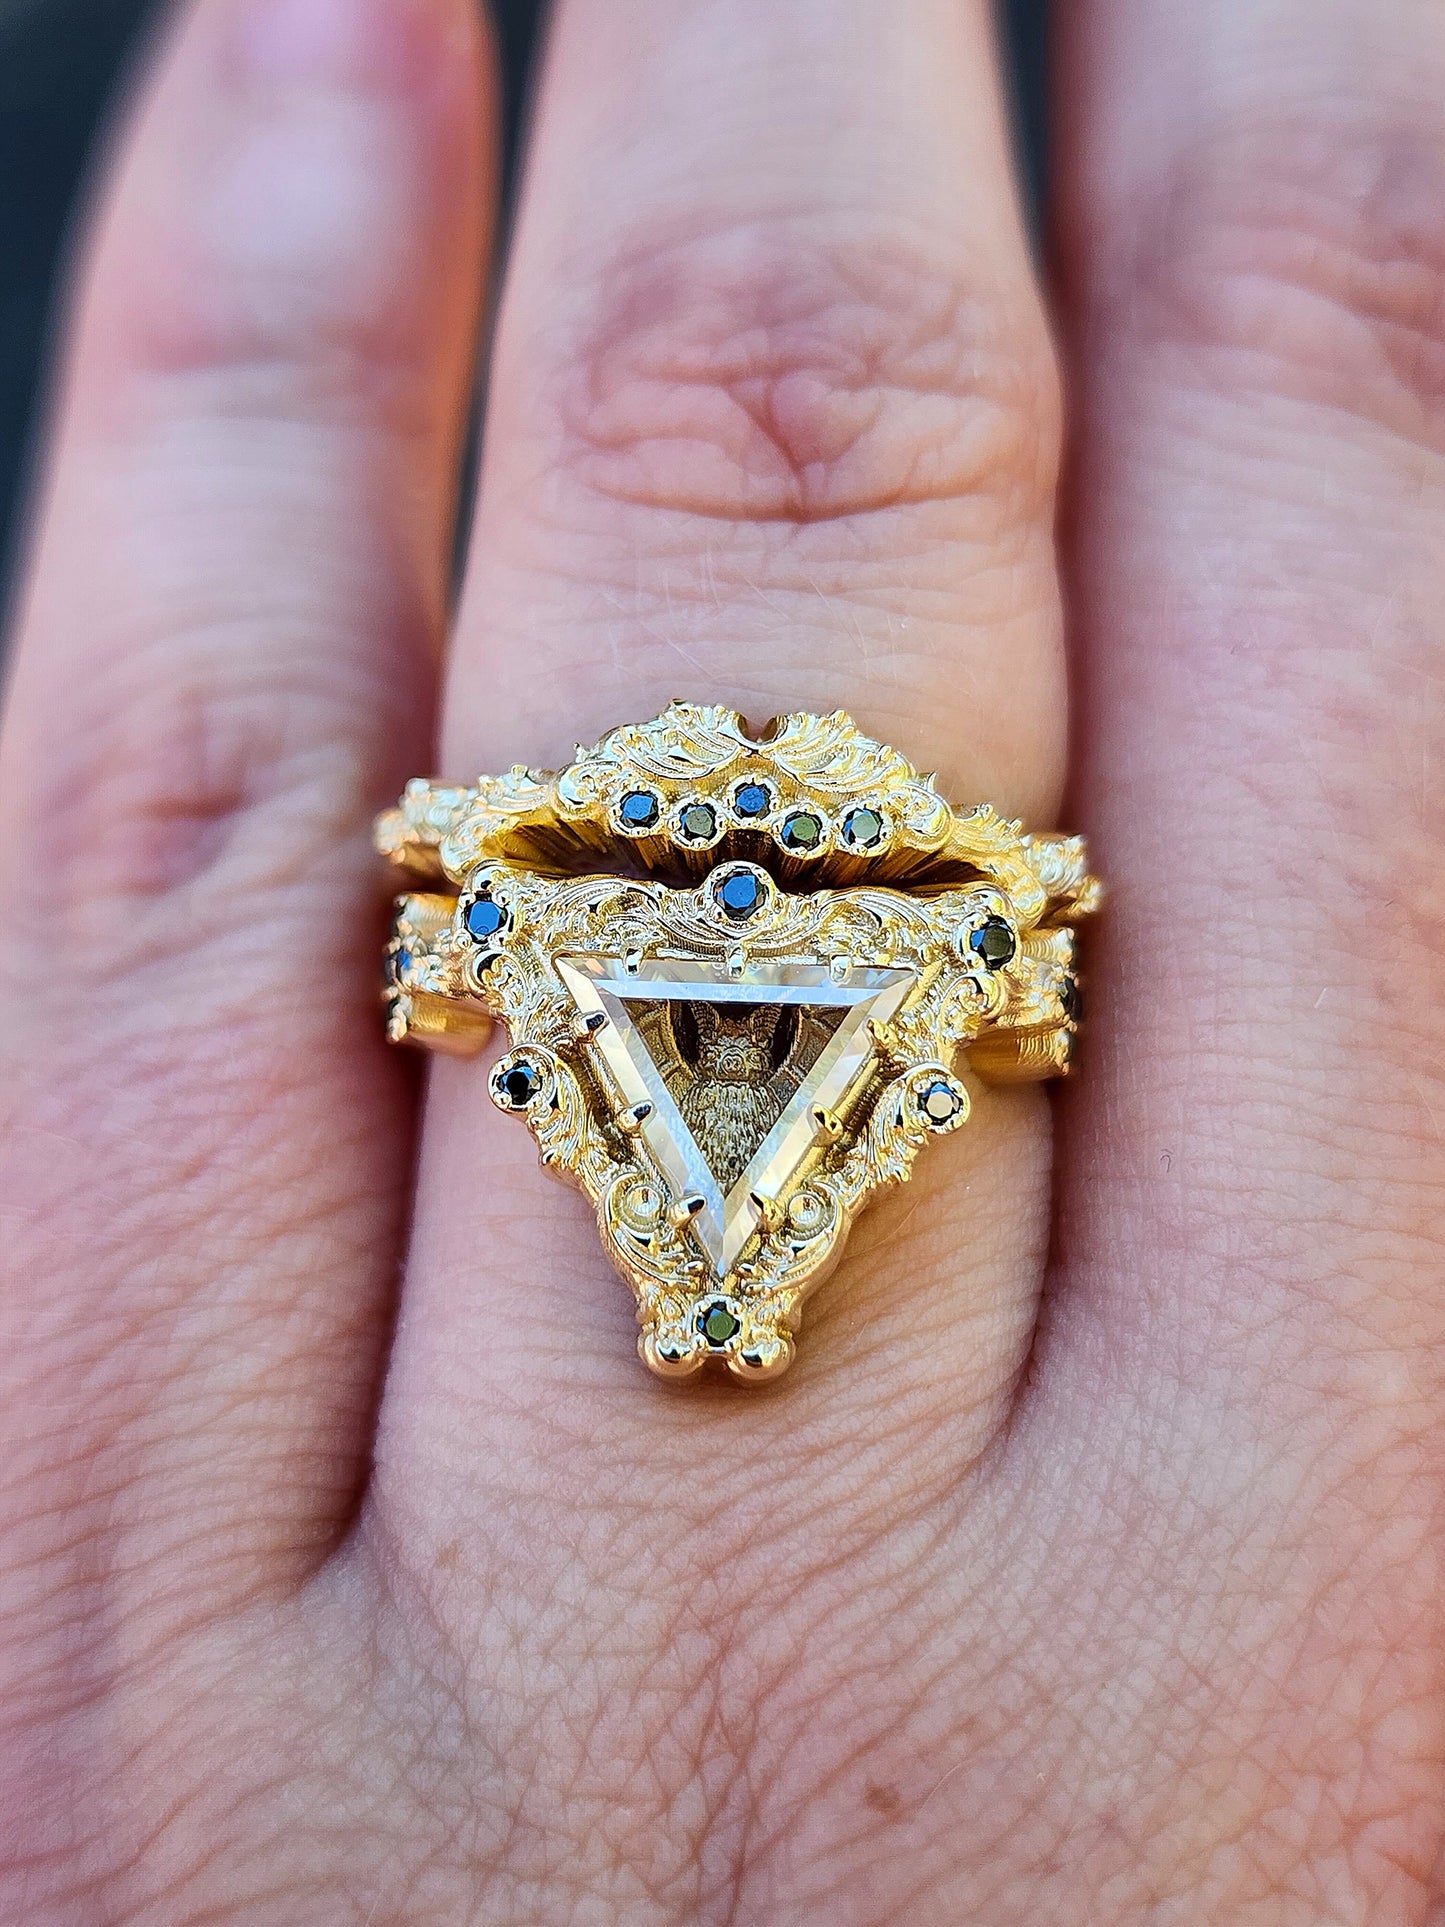 Ready to Ship Victorian Gothic Bat Engagement Ring Shadow Box with Triangle Portrait Cut Moissanite Wedding Ring Set Baroque Scrolls with Black or White Diamonds 14k Gold Ethereal Unique Fine Jewelry